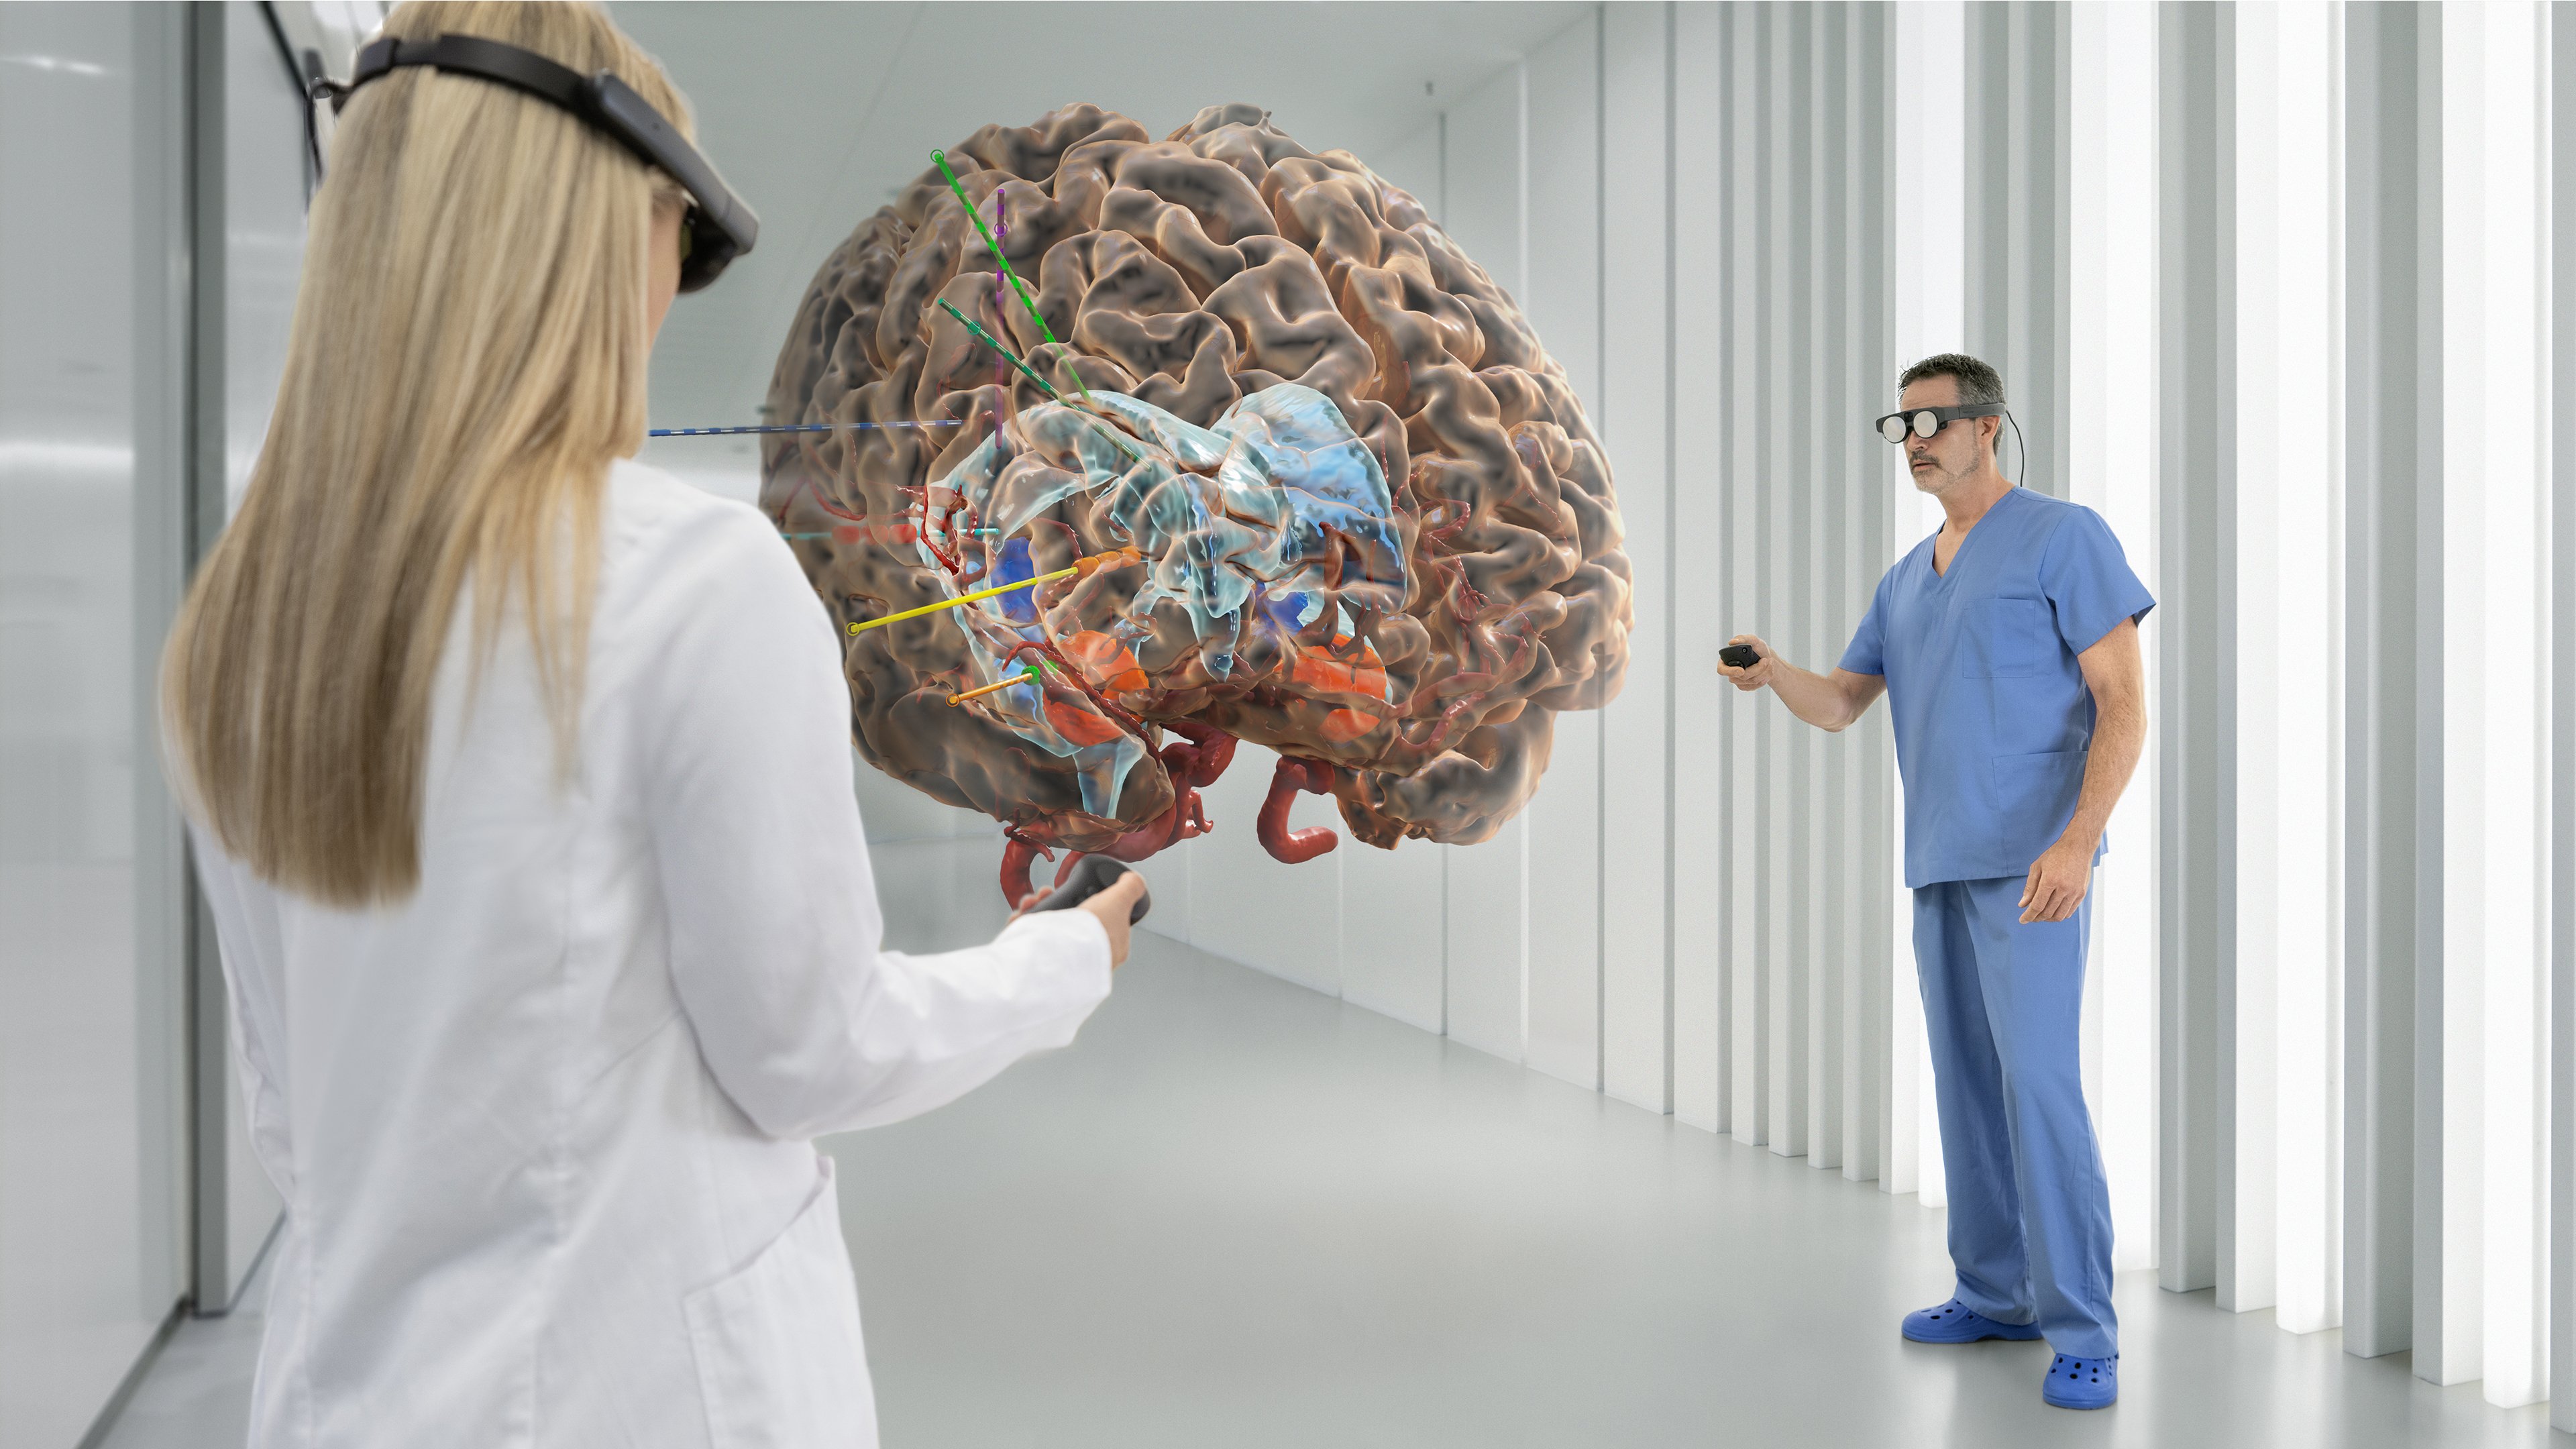 Brainlab's Mixed Reality Viewer in use at a hospital, with two individuals viewing a cranial image